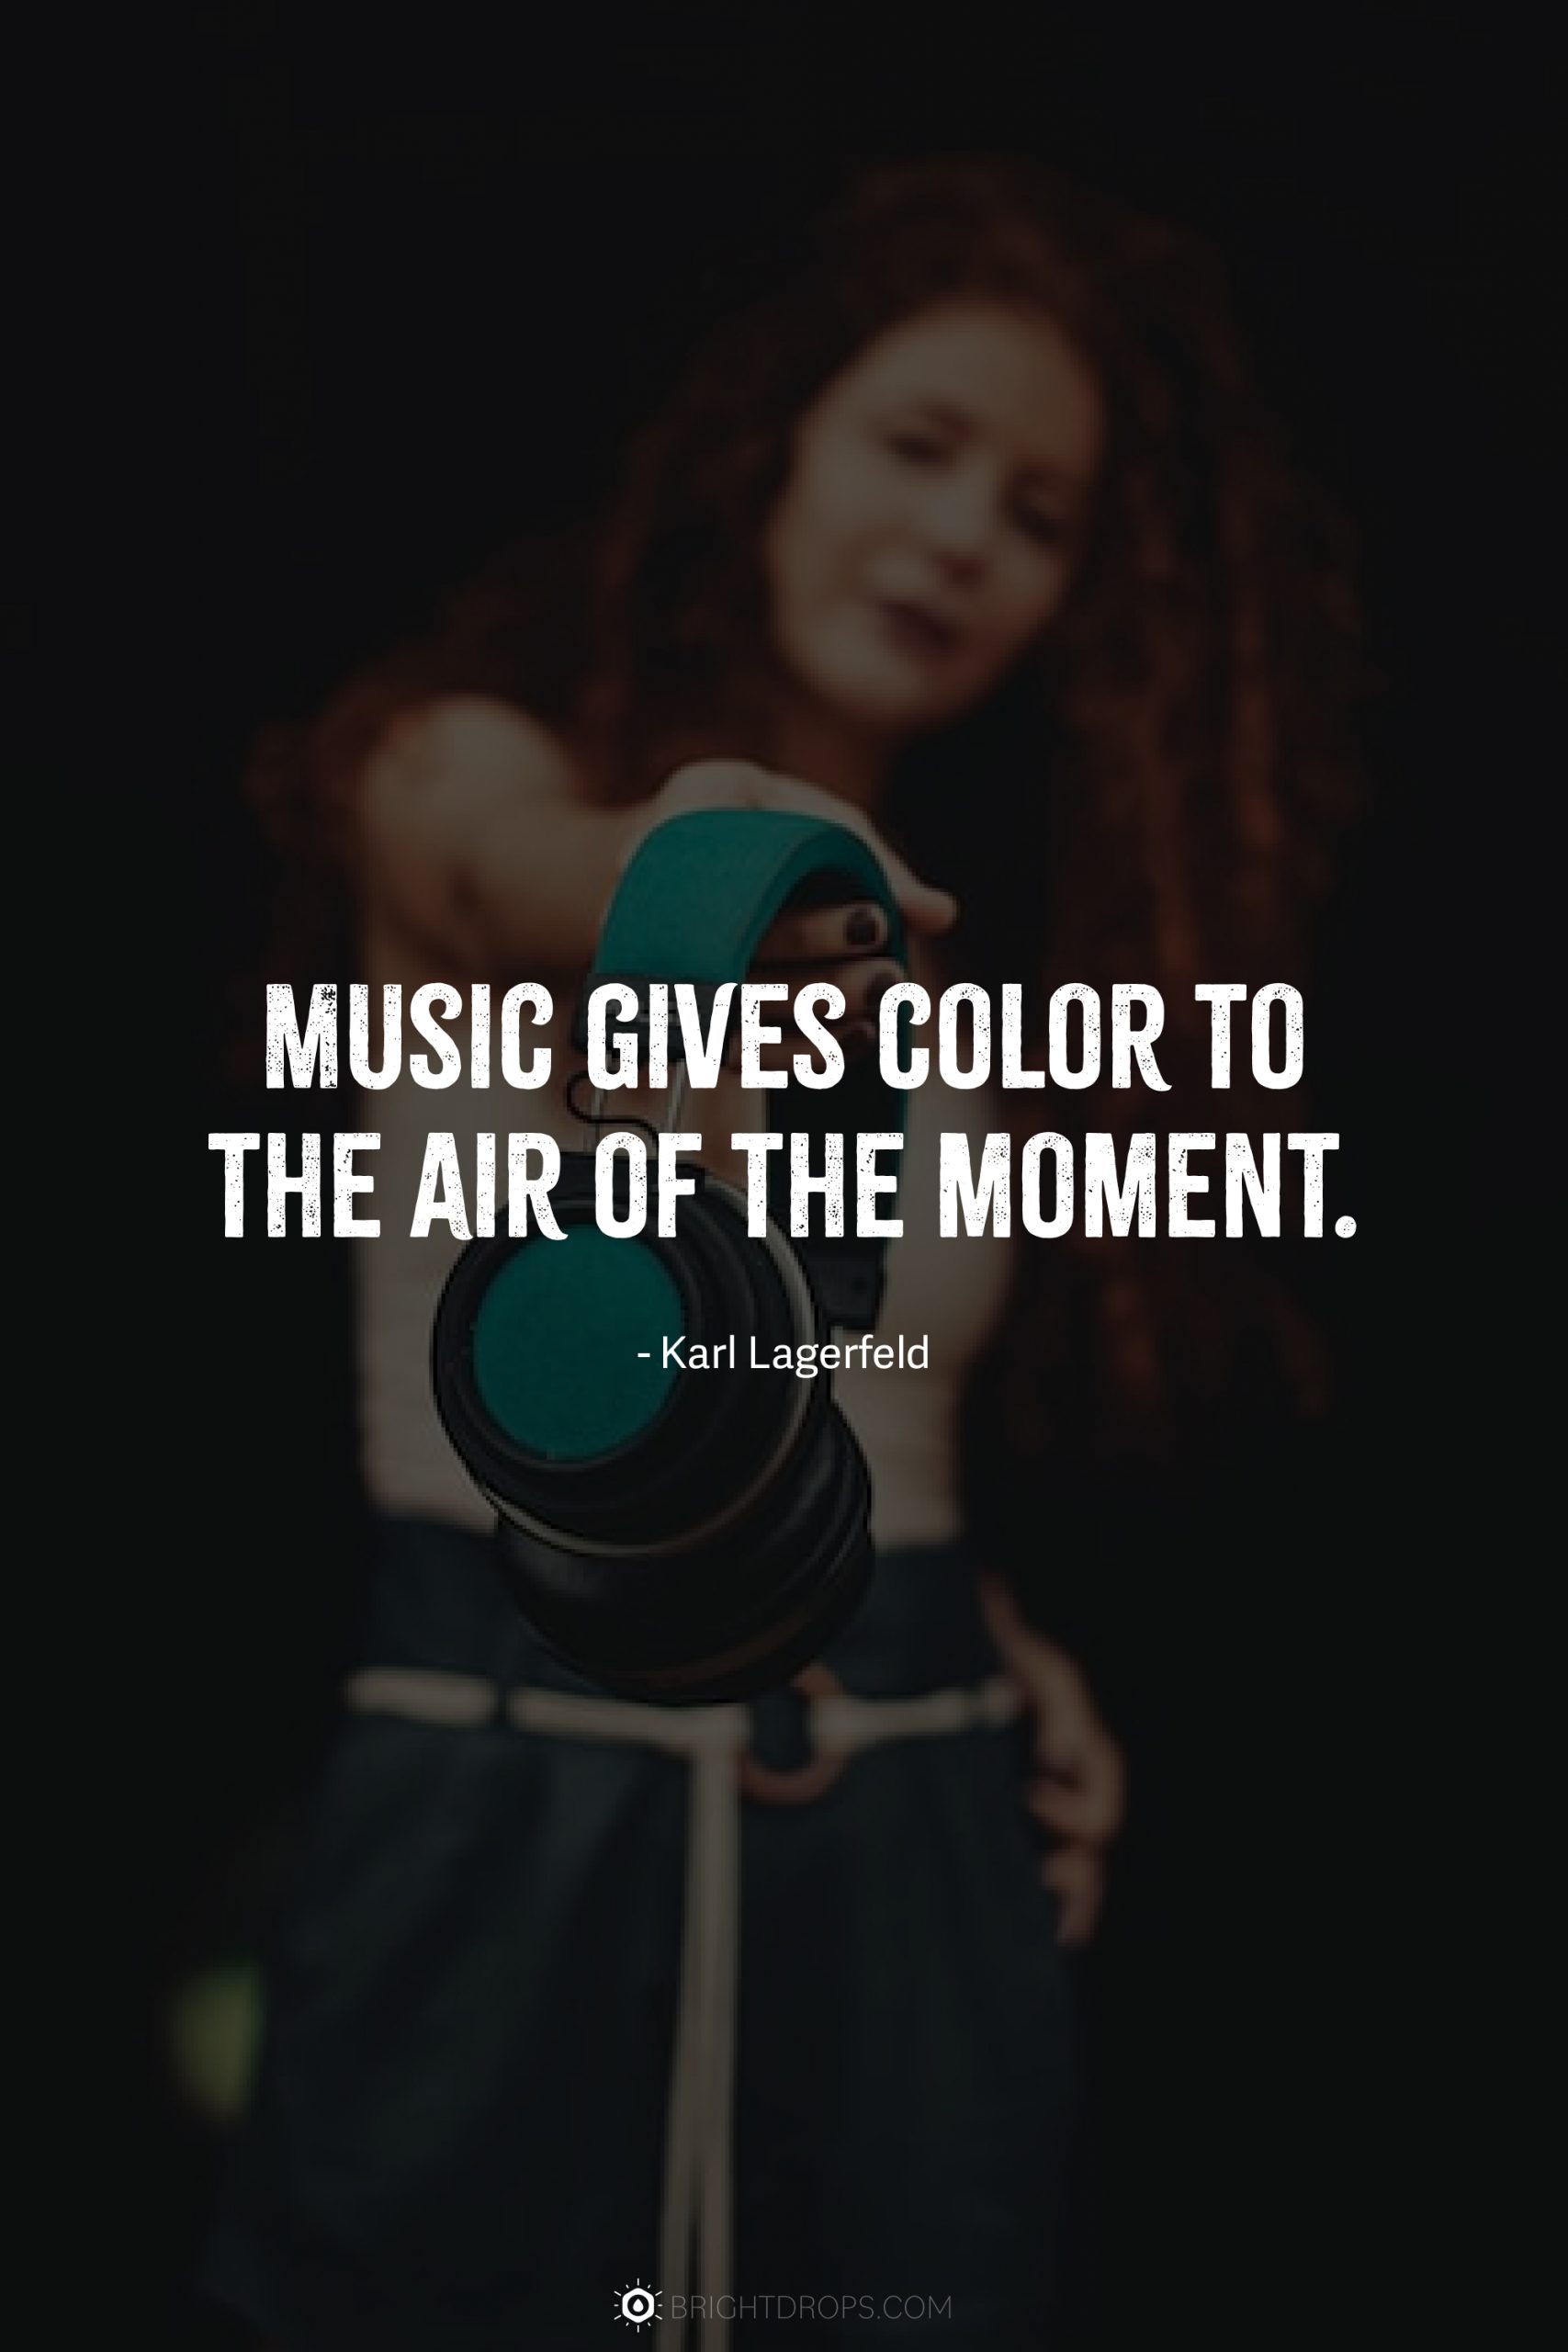 Music gives color to the air of the moment.